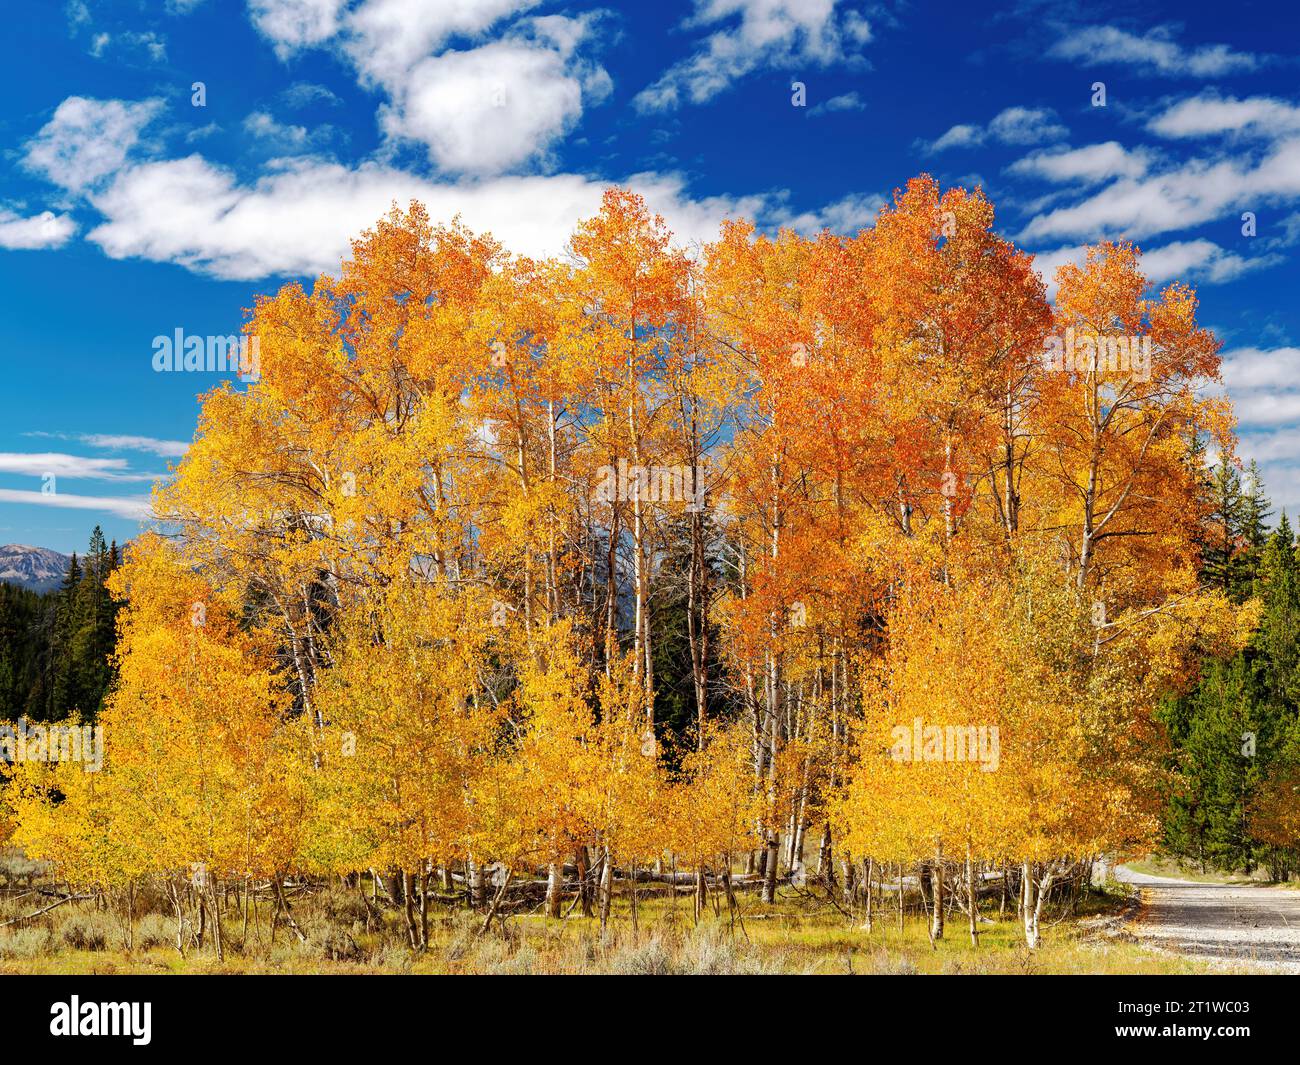 Orange and yellow Aspen trees in the country with a gravel road Stock Photo